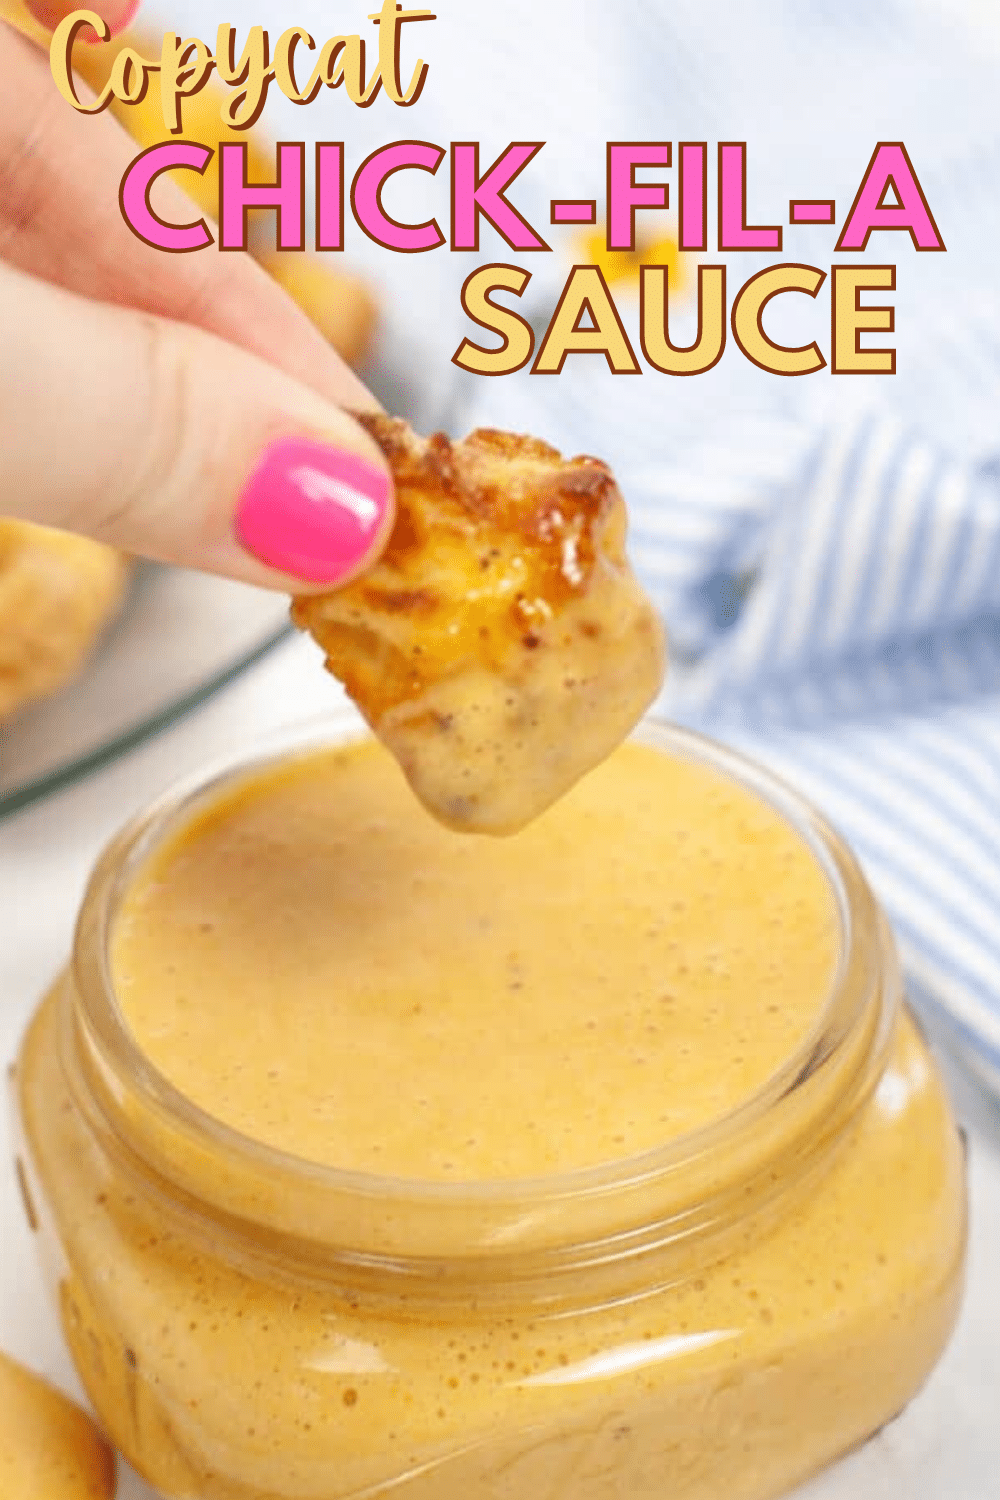 Looking for the perfect dipping sauce or topper on your sandwich? This Copycat Chick-Fil-A Sauce is it! Simple, fast, and crazy good! #copycatrecipe #chickfilasauce #dippingsauce via @wondermomwannab